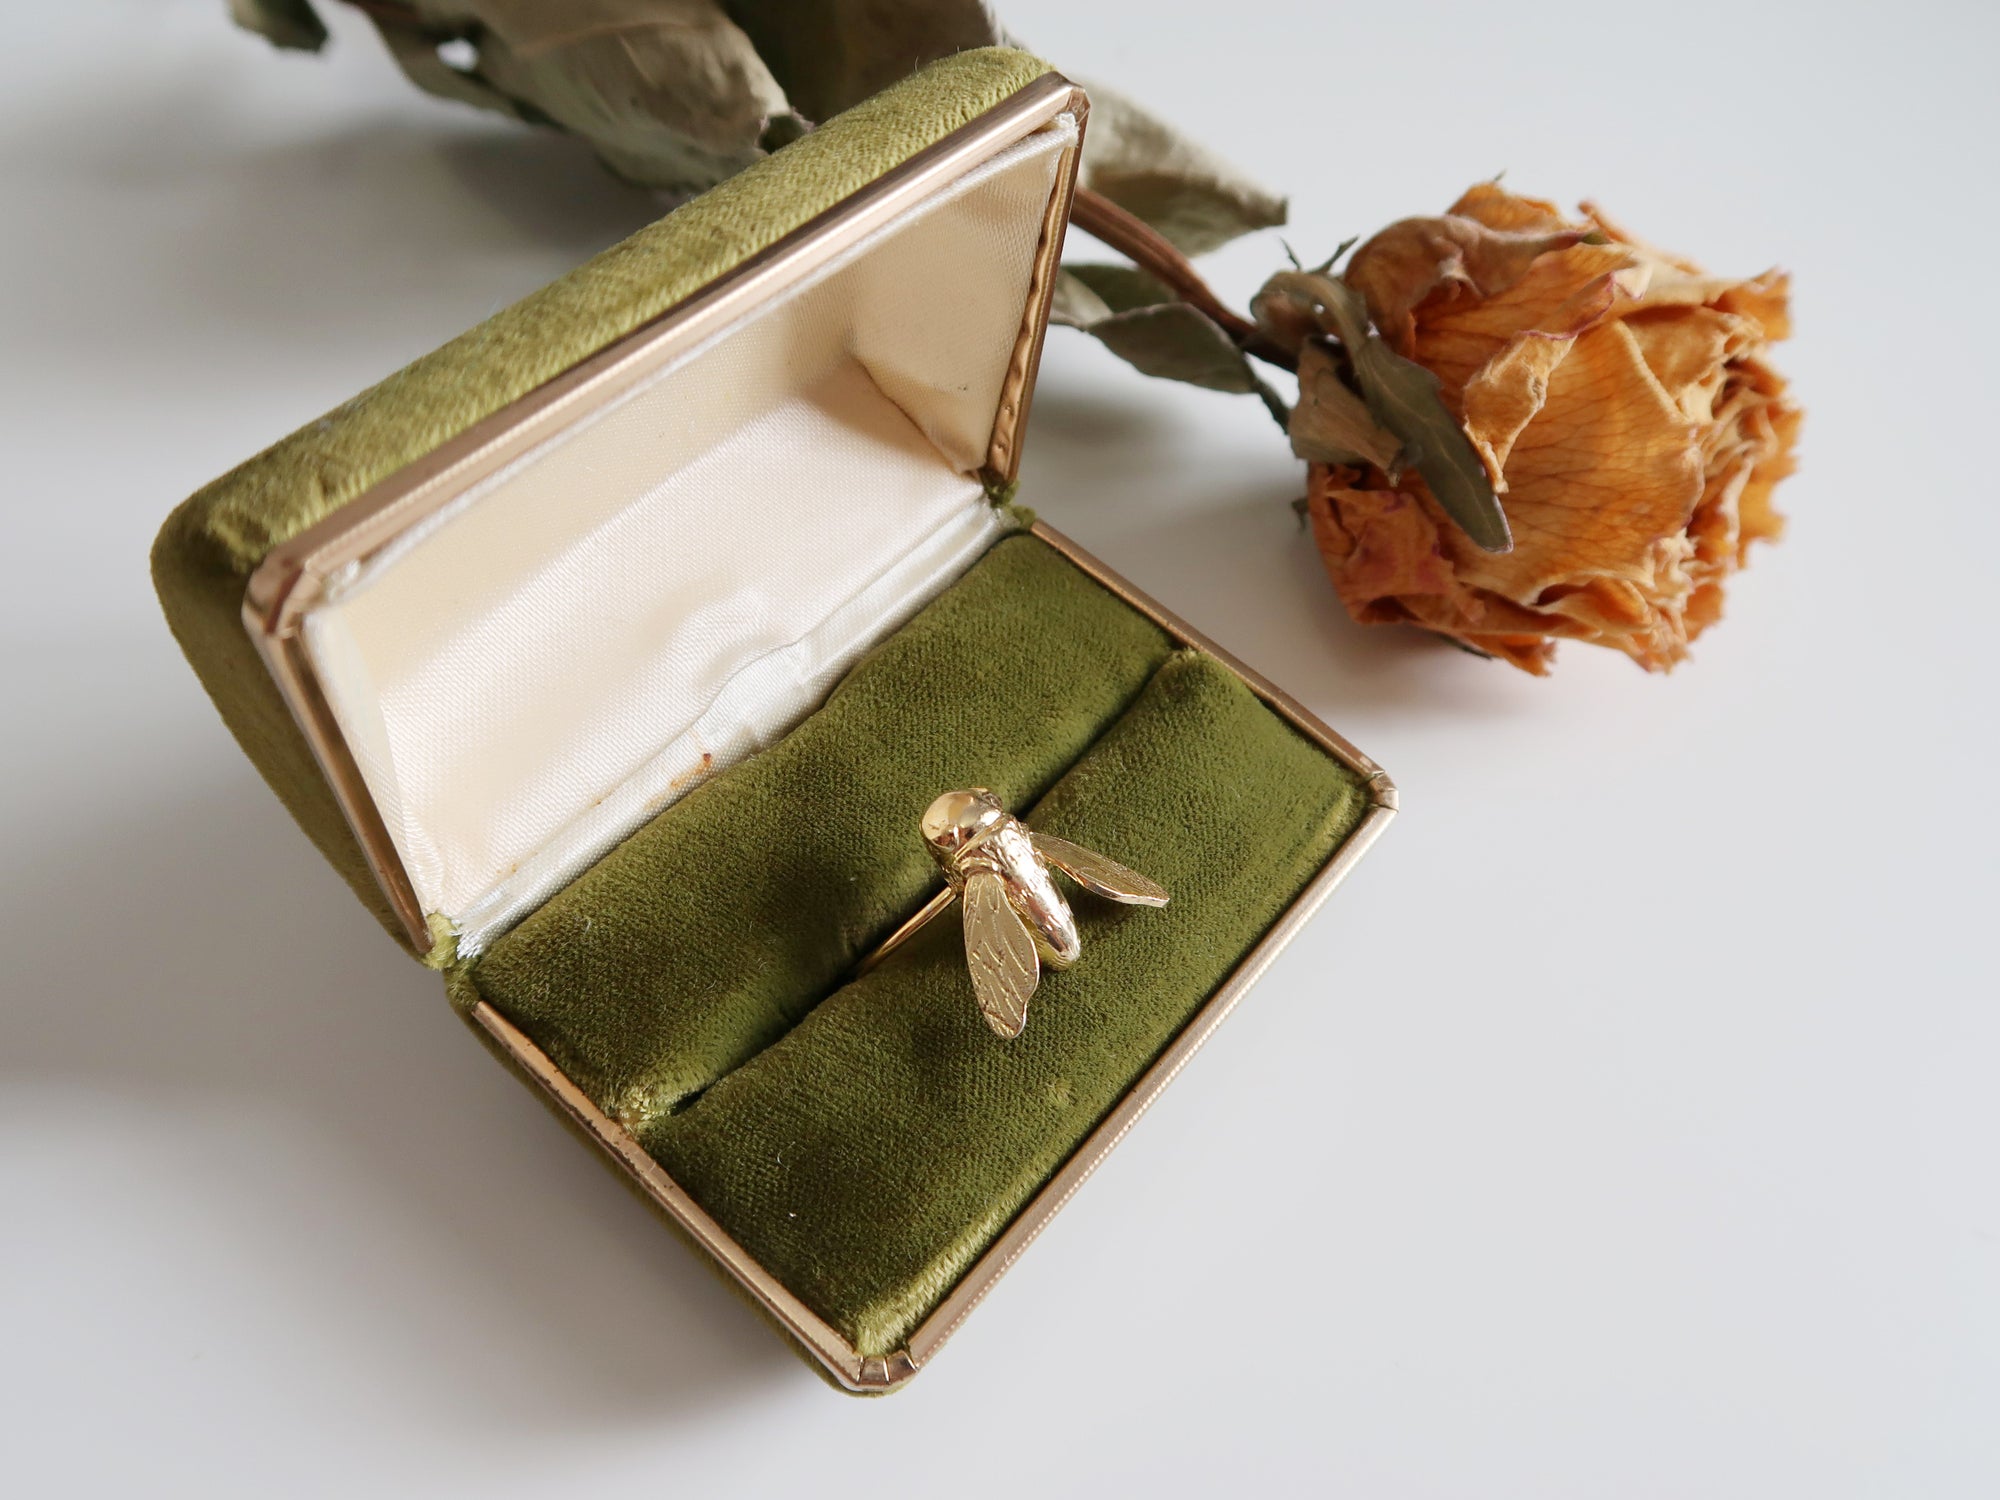 Sculptural Bee Ring - Magpie Jewellery